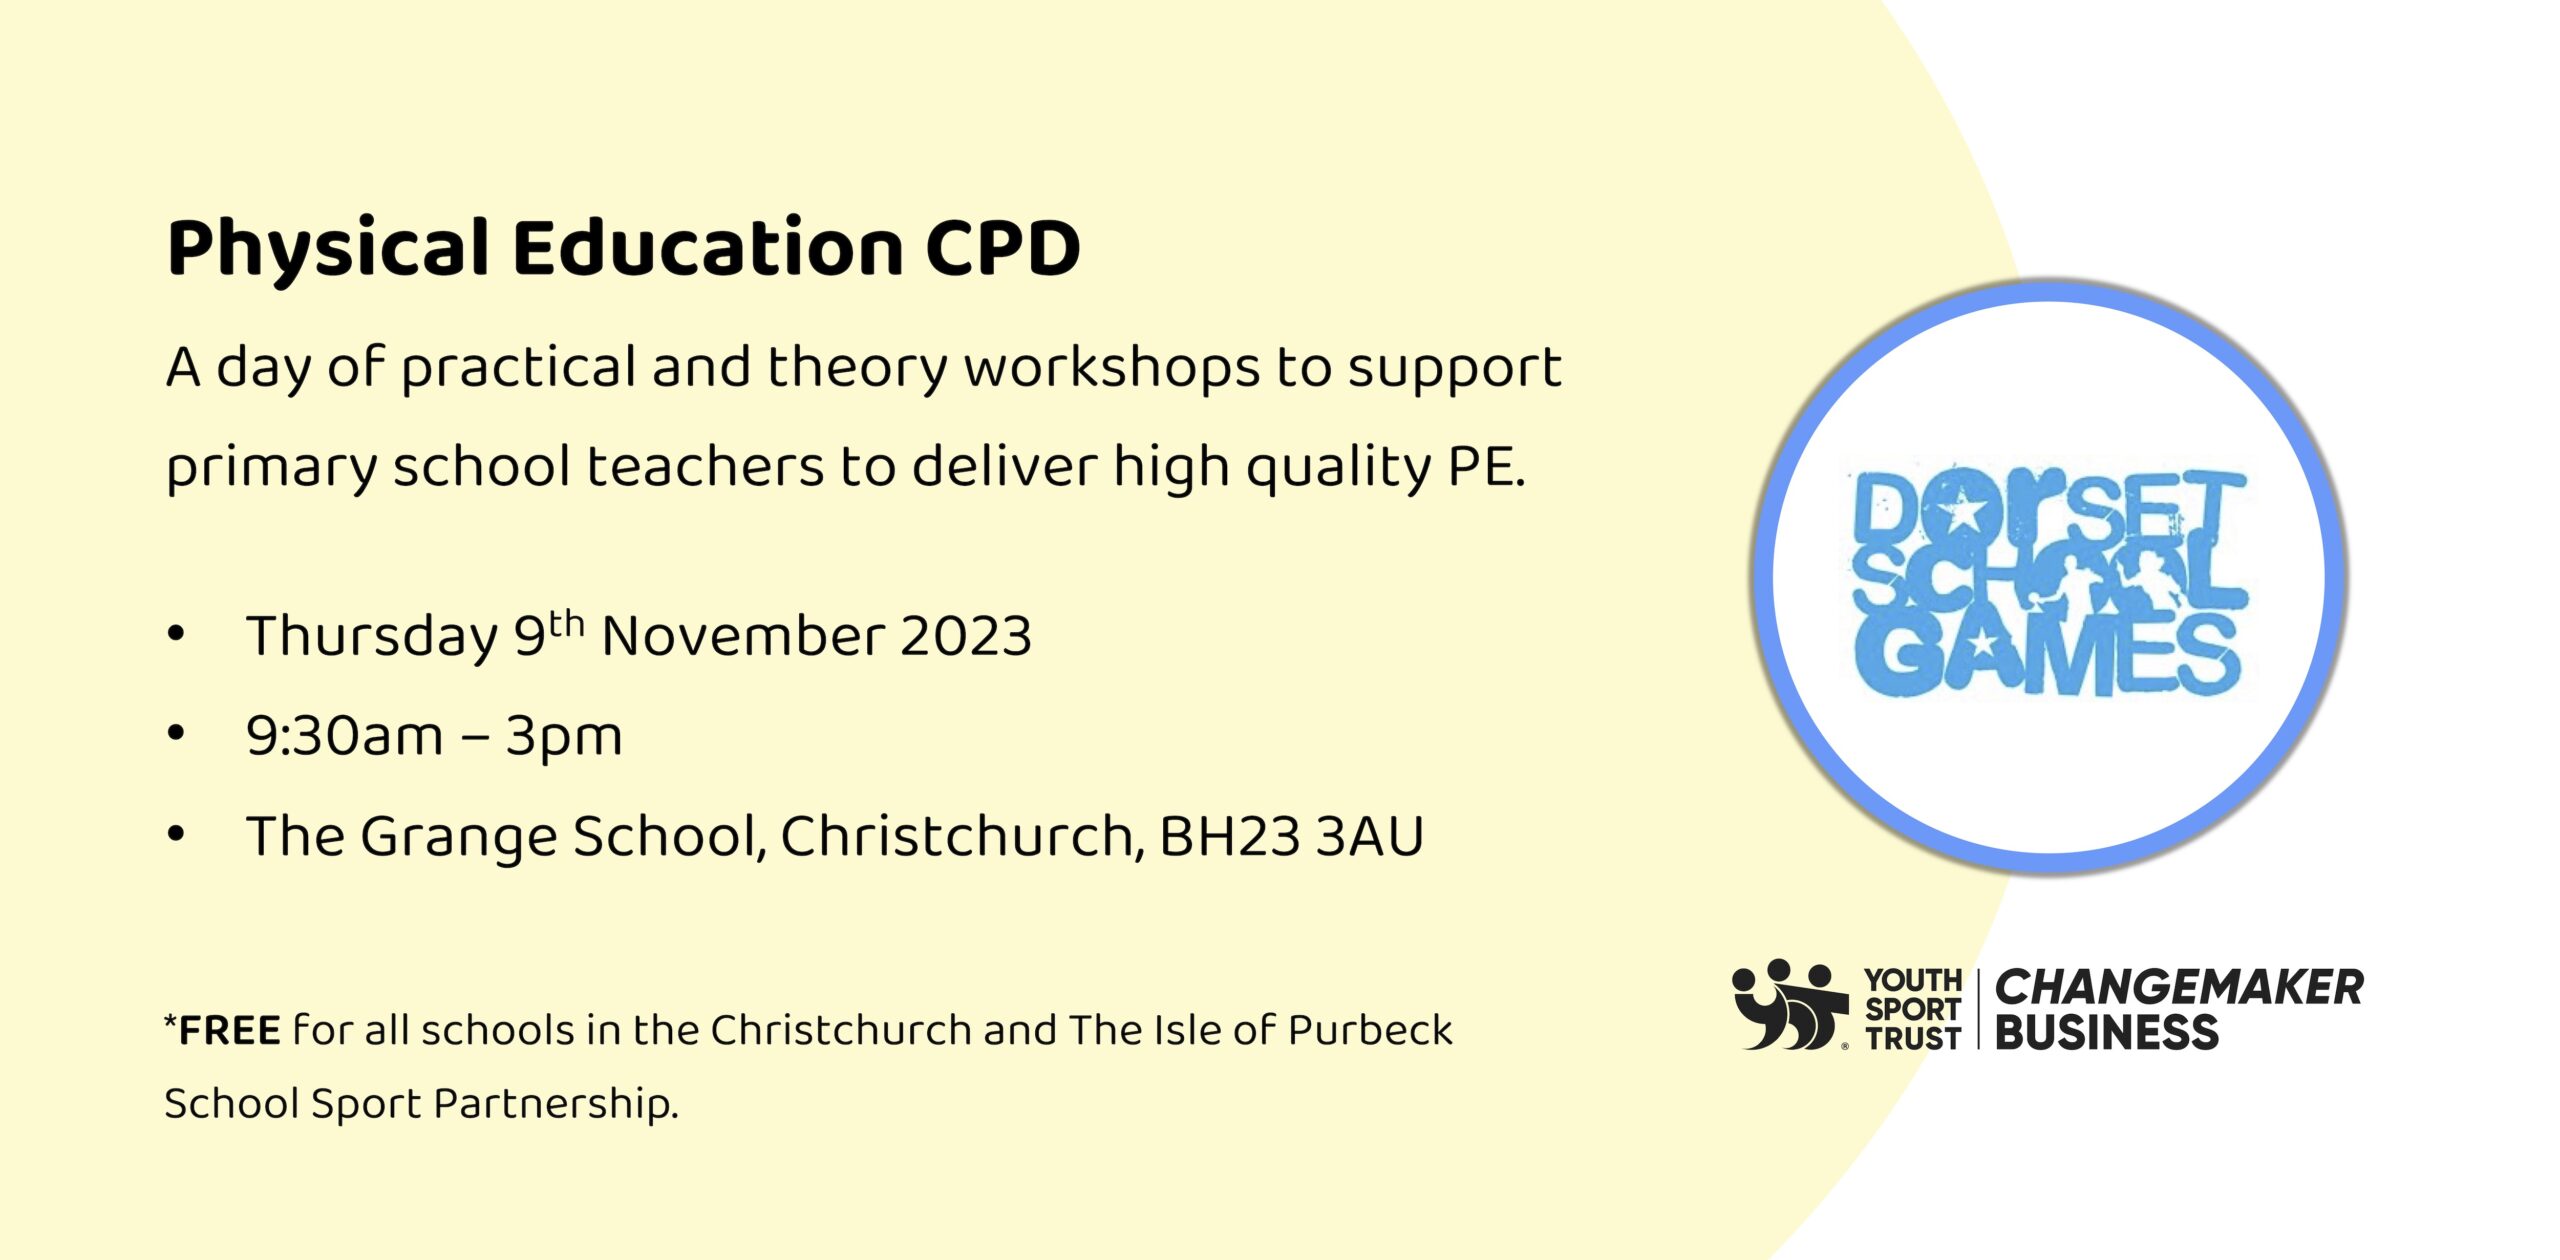 Dorset | Physical Education CPD